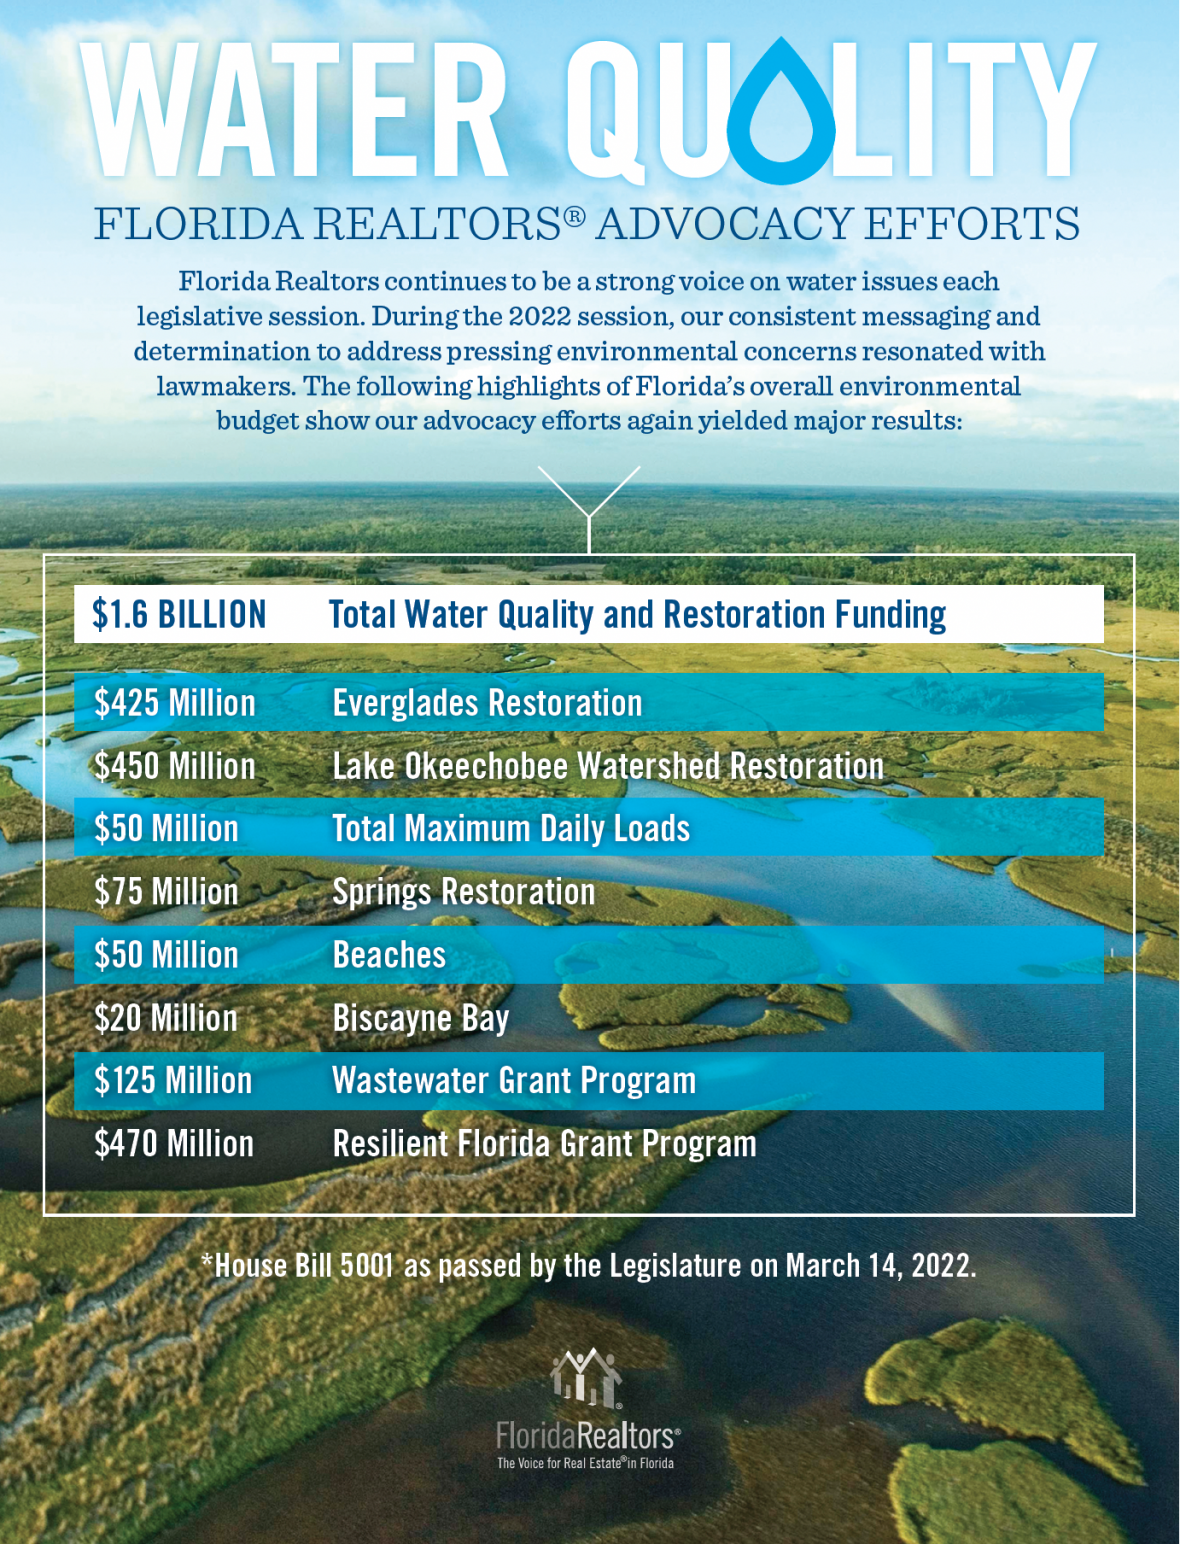  Florida Realtors water quality advocacy efforts infographic